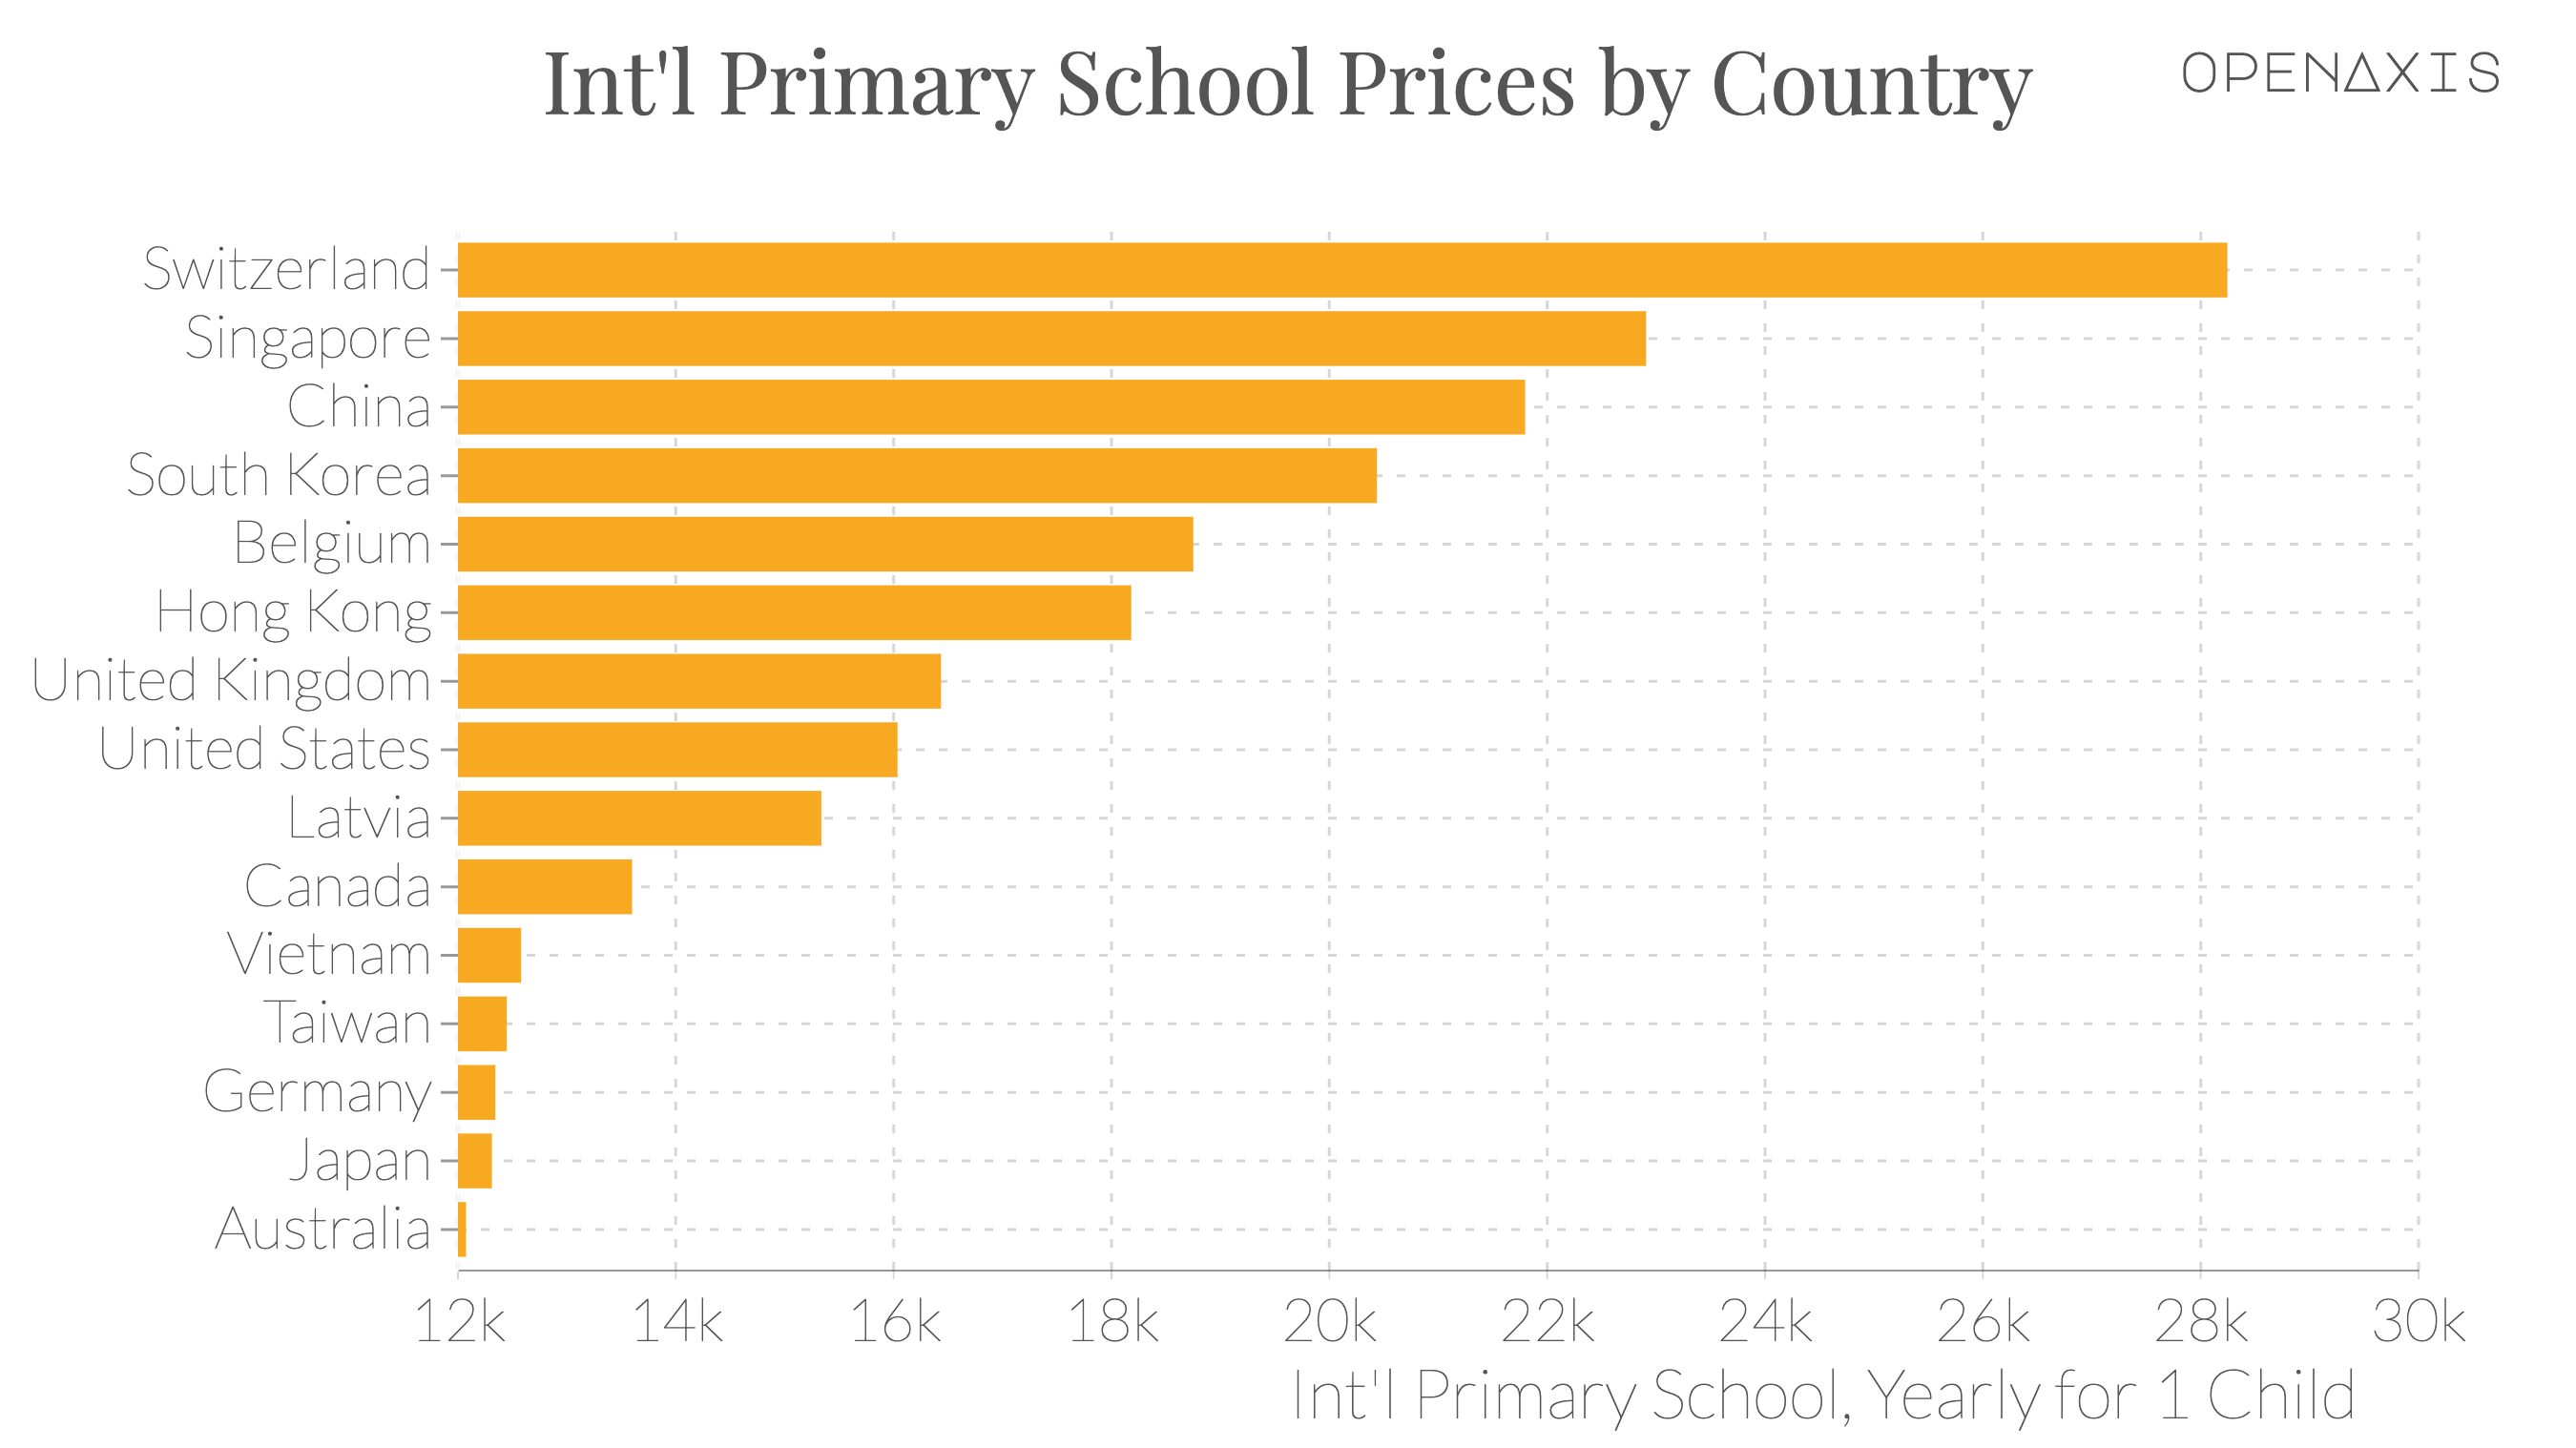 "Int'l Primary School Prices by Country"